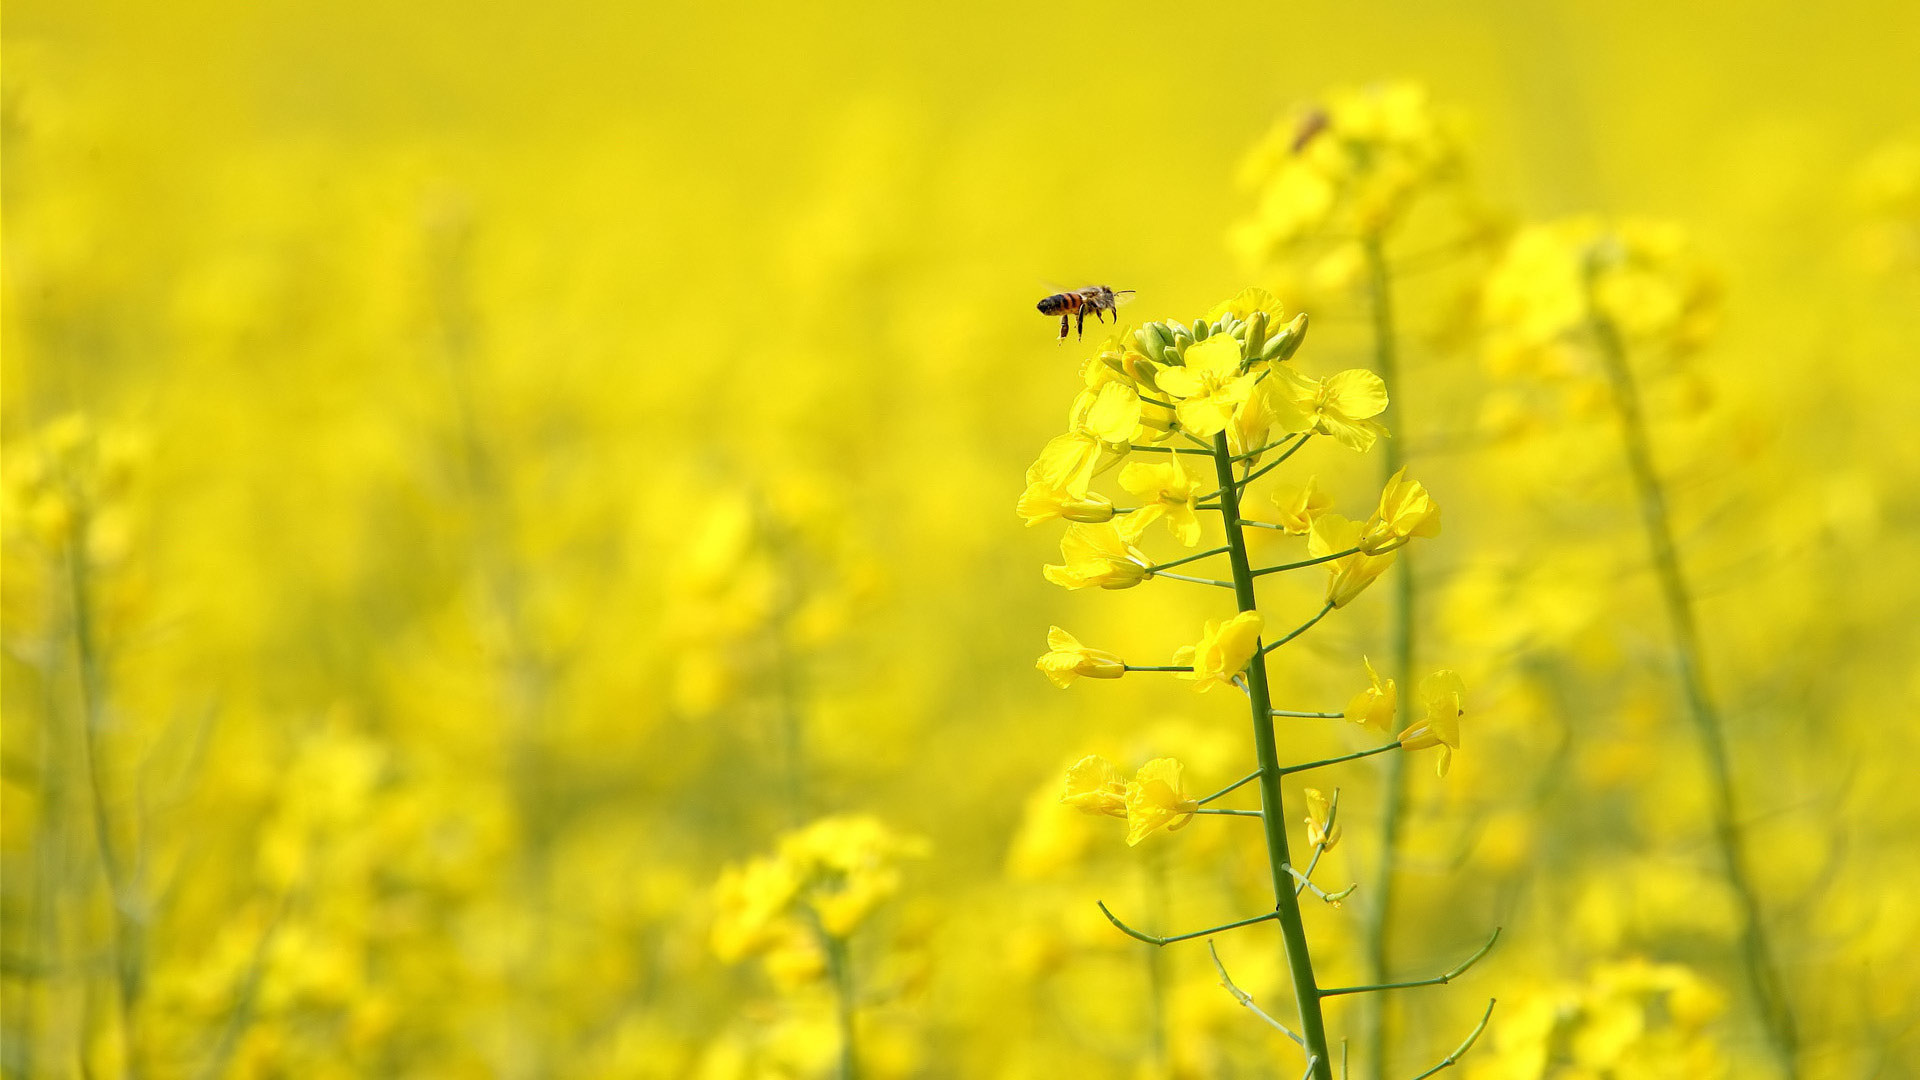 Bee: Honeybee, known for producing and storing honey. 1920x1080 Full HD Wallpaper.